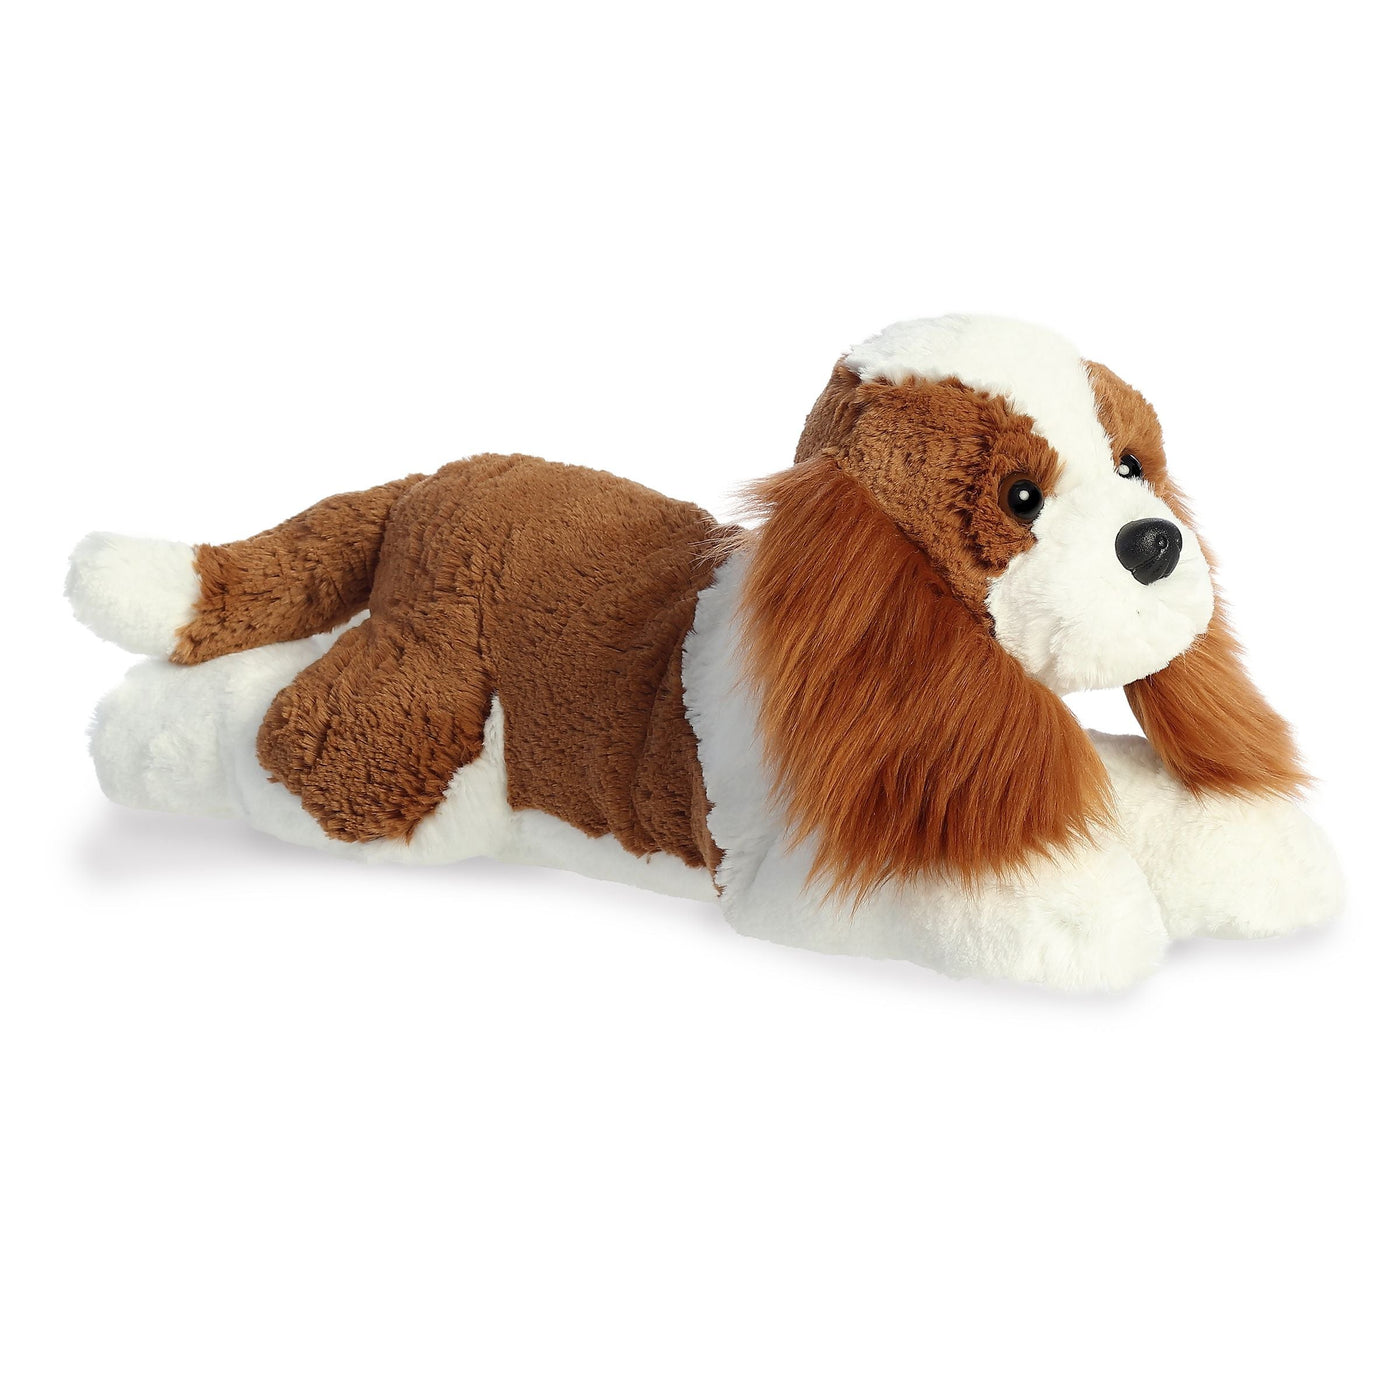 Aurora Grand Flopsy 16.5" Toy-Home/Giftware-CHARLES SPANIEL-Kevin's Fine Outdoor Gear & Apparel